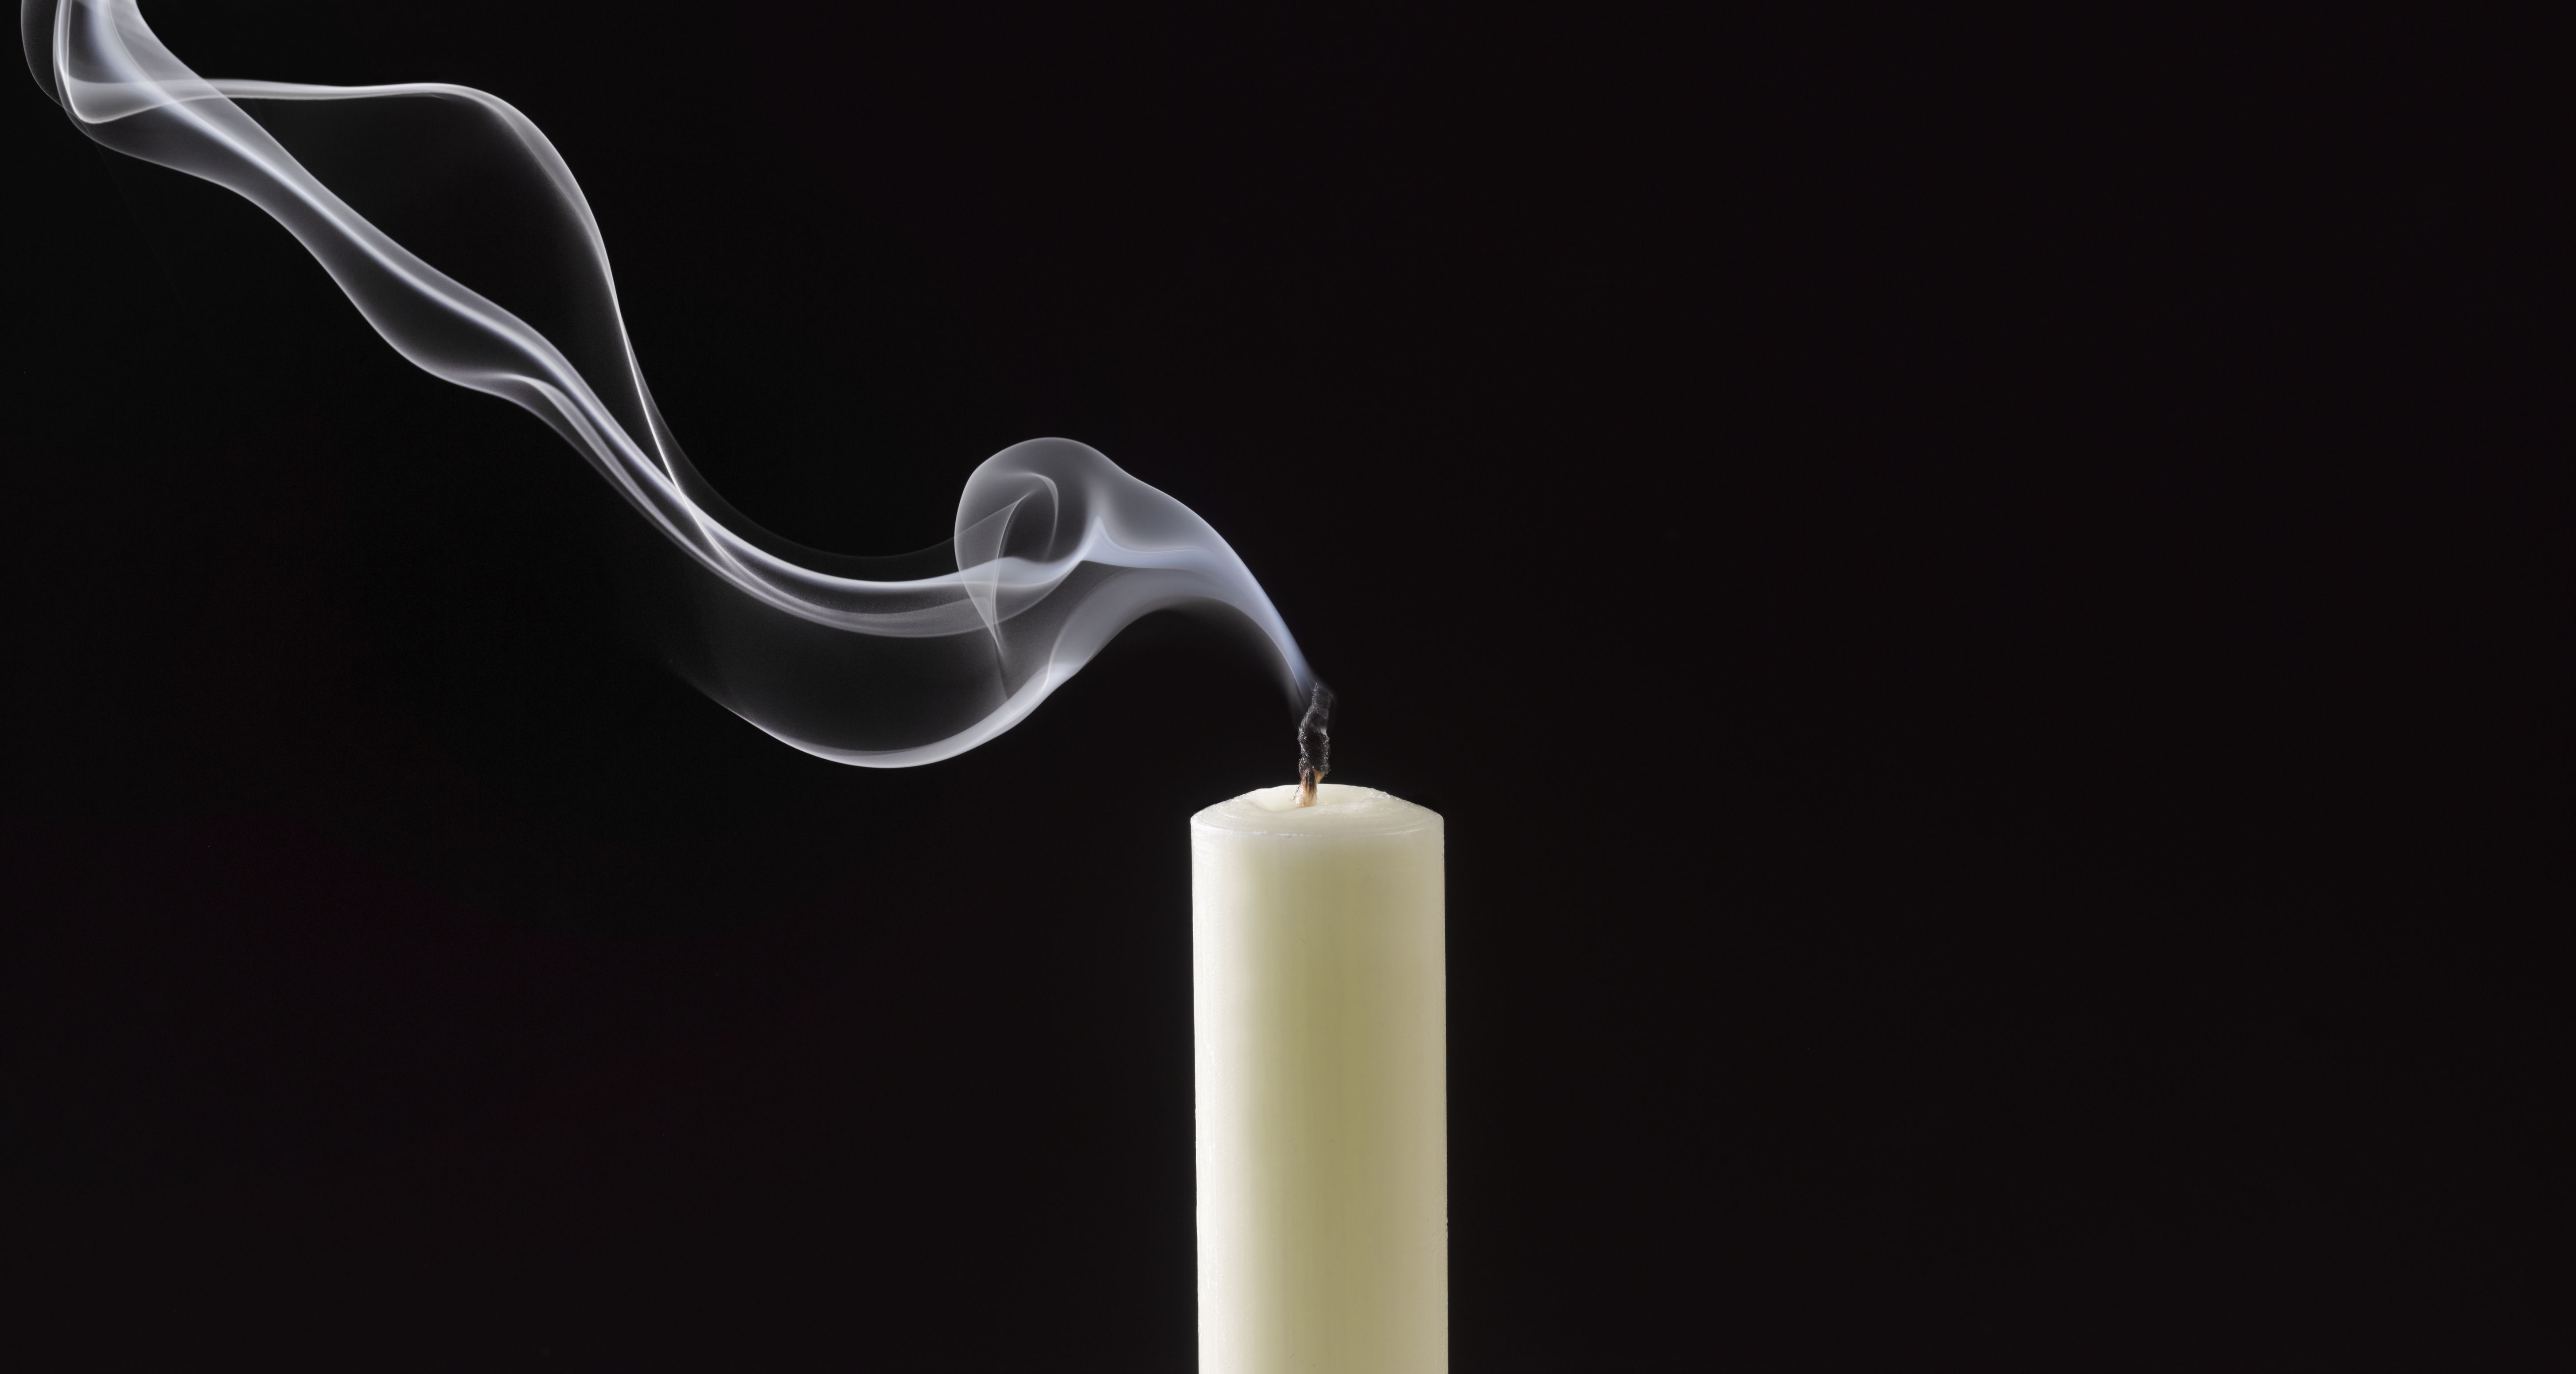 Light a Candle with Smoke (Flame Science Trick)